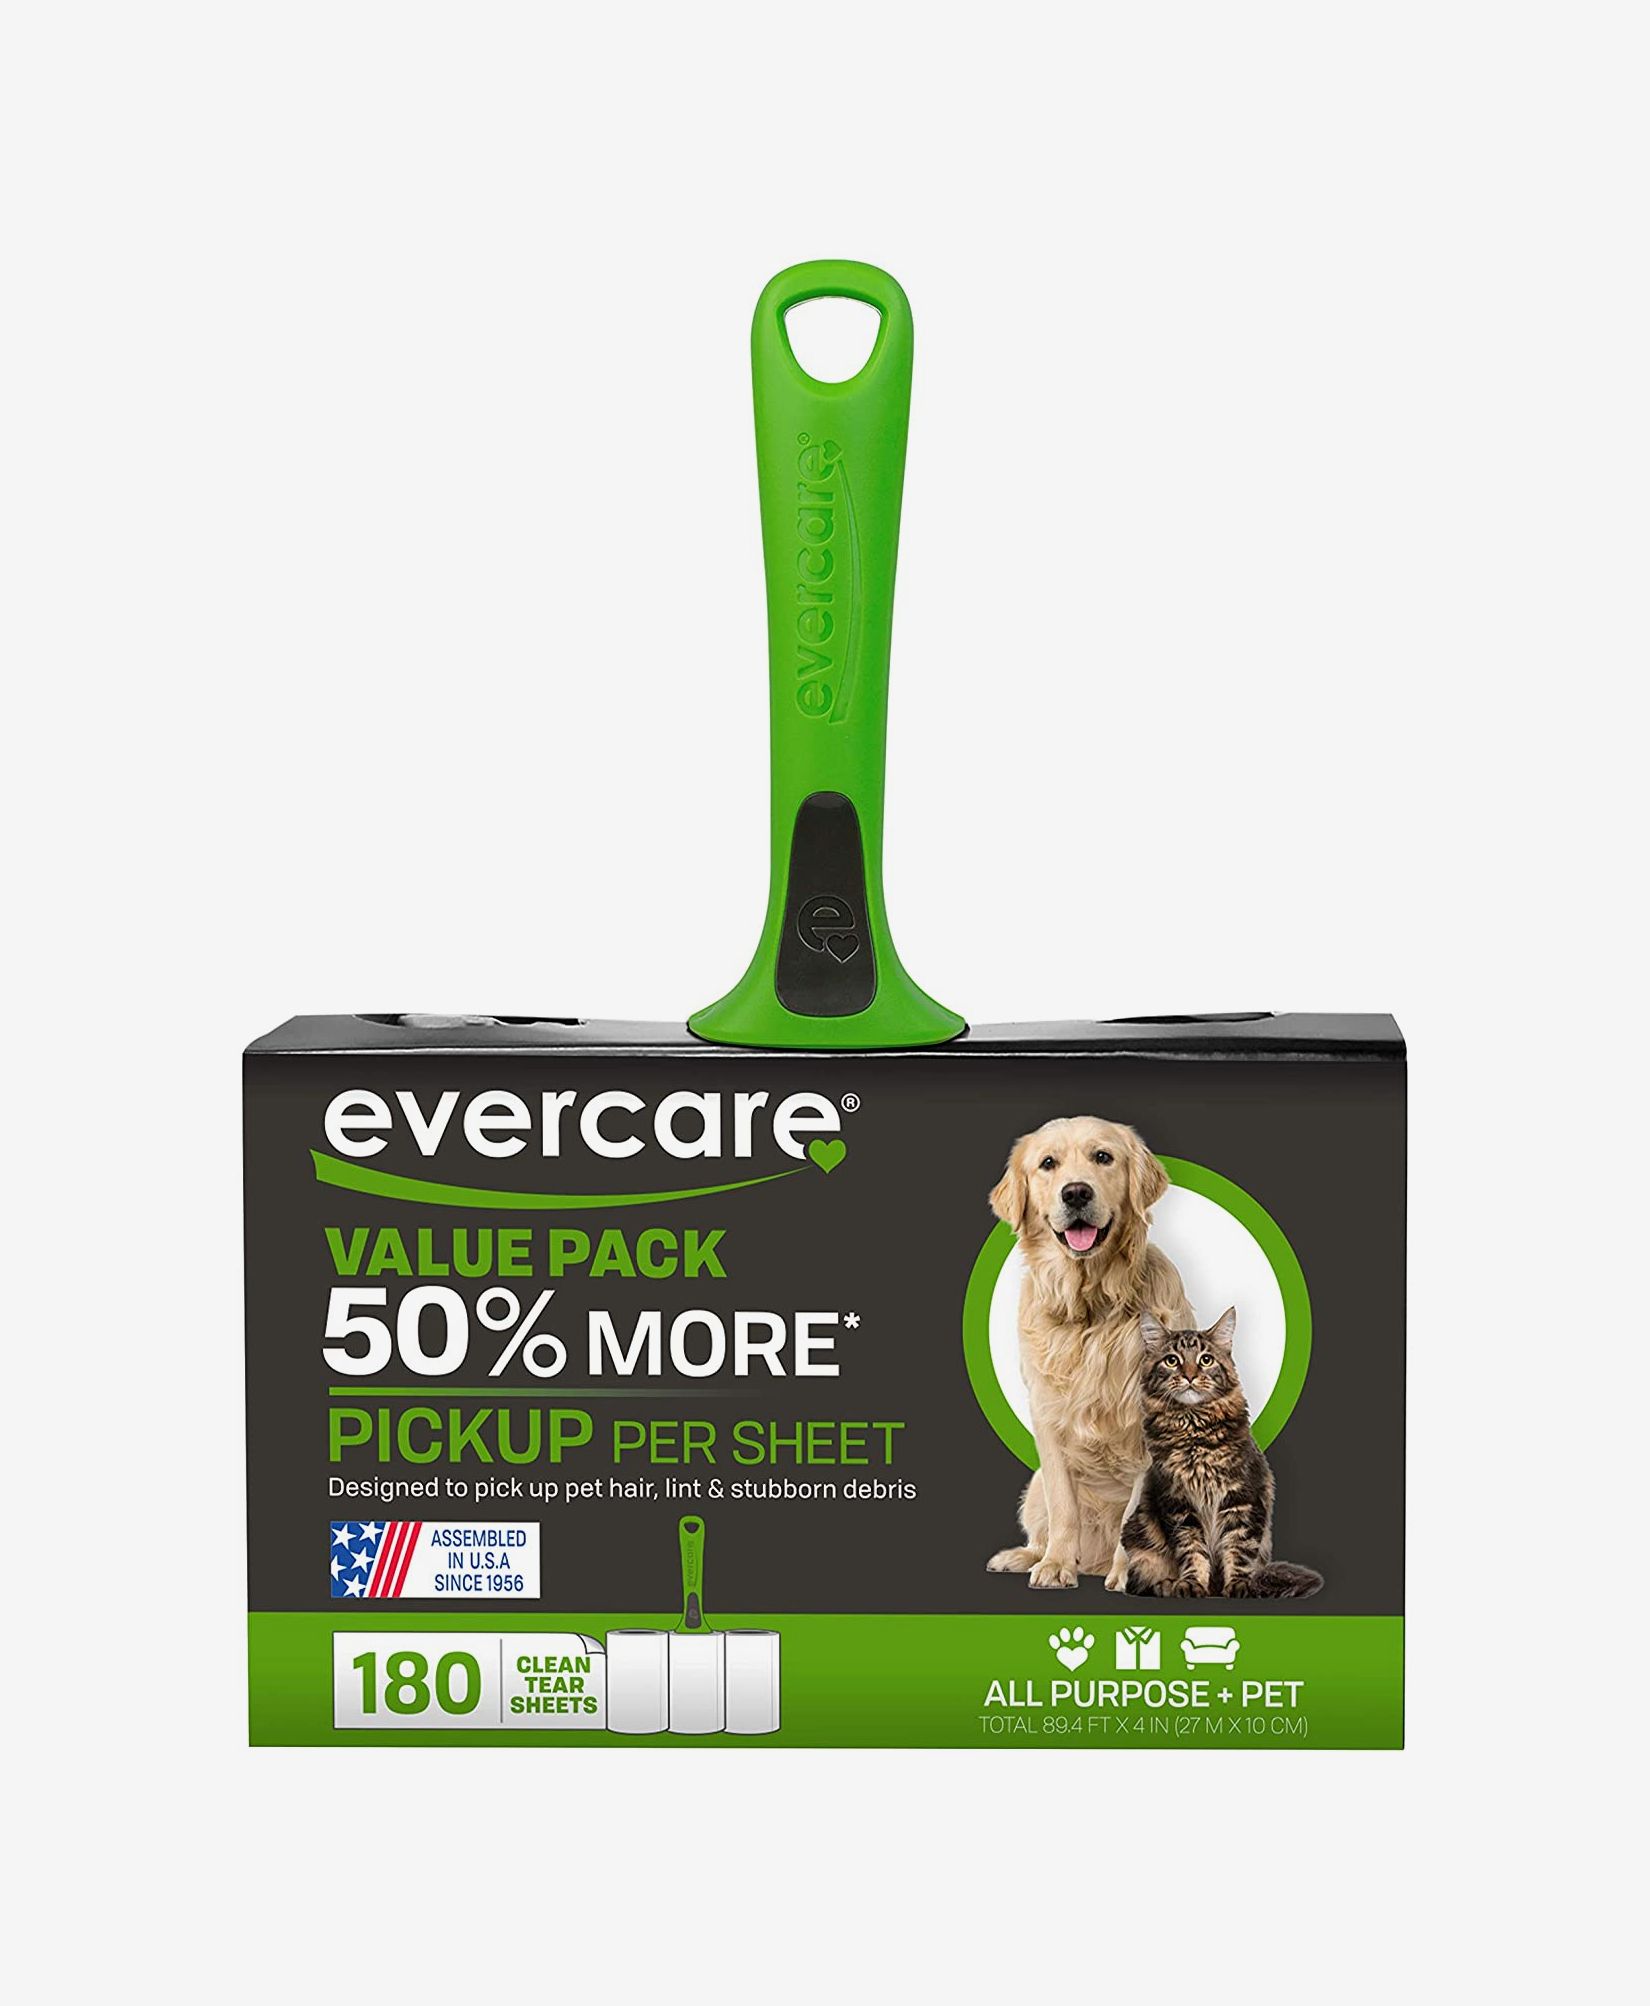 27 Best Pet-safe Cleaning & Dishwashing Products for Your Home